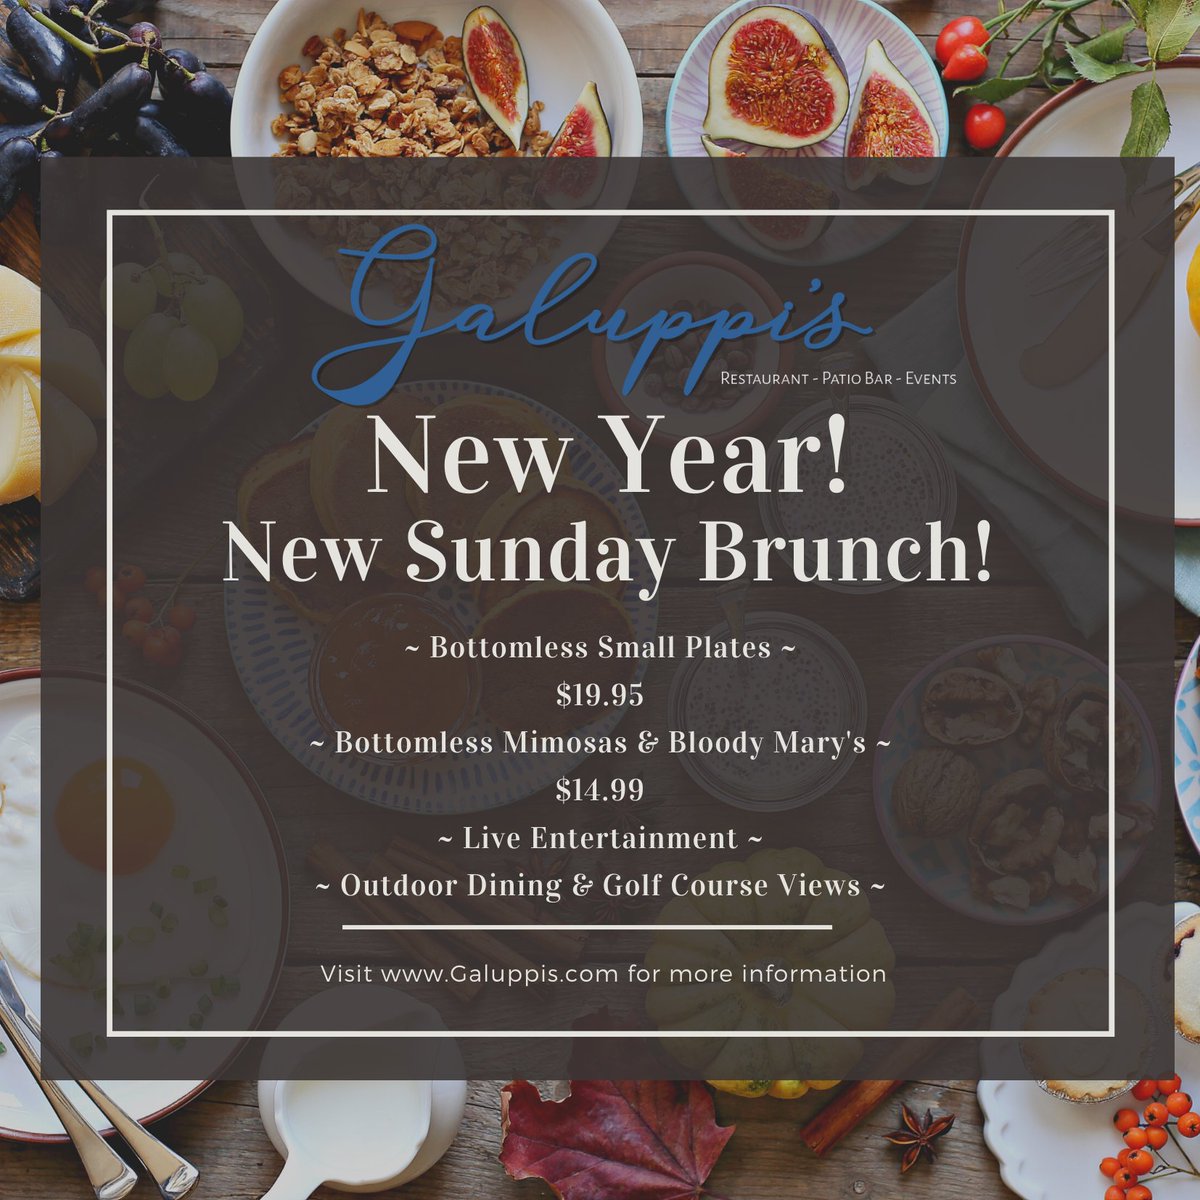 New Year. New Sunday Brunch! Endless Small Plates. Only $19.95/pp. starting at 10am Jan. 3rd.